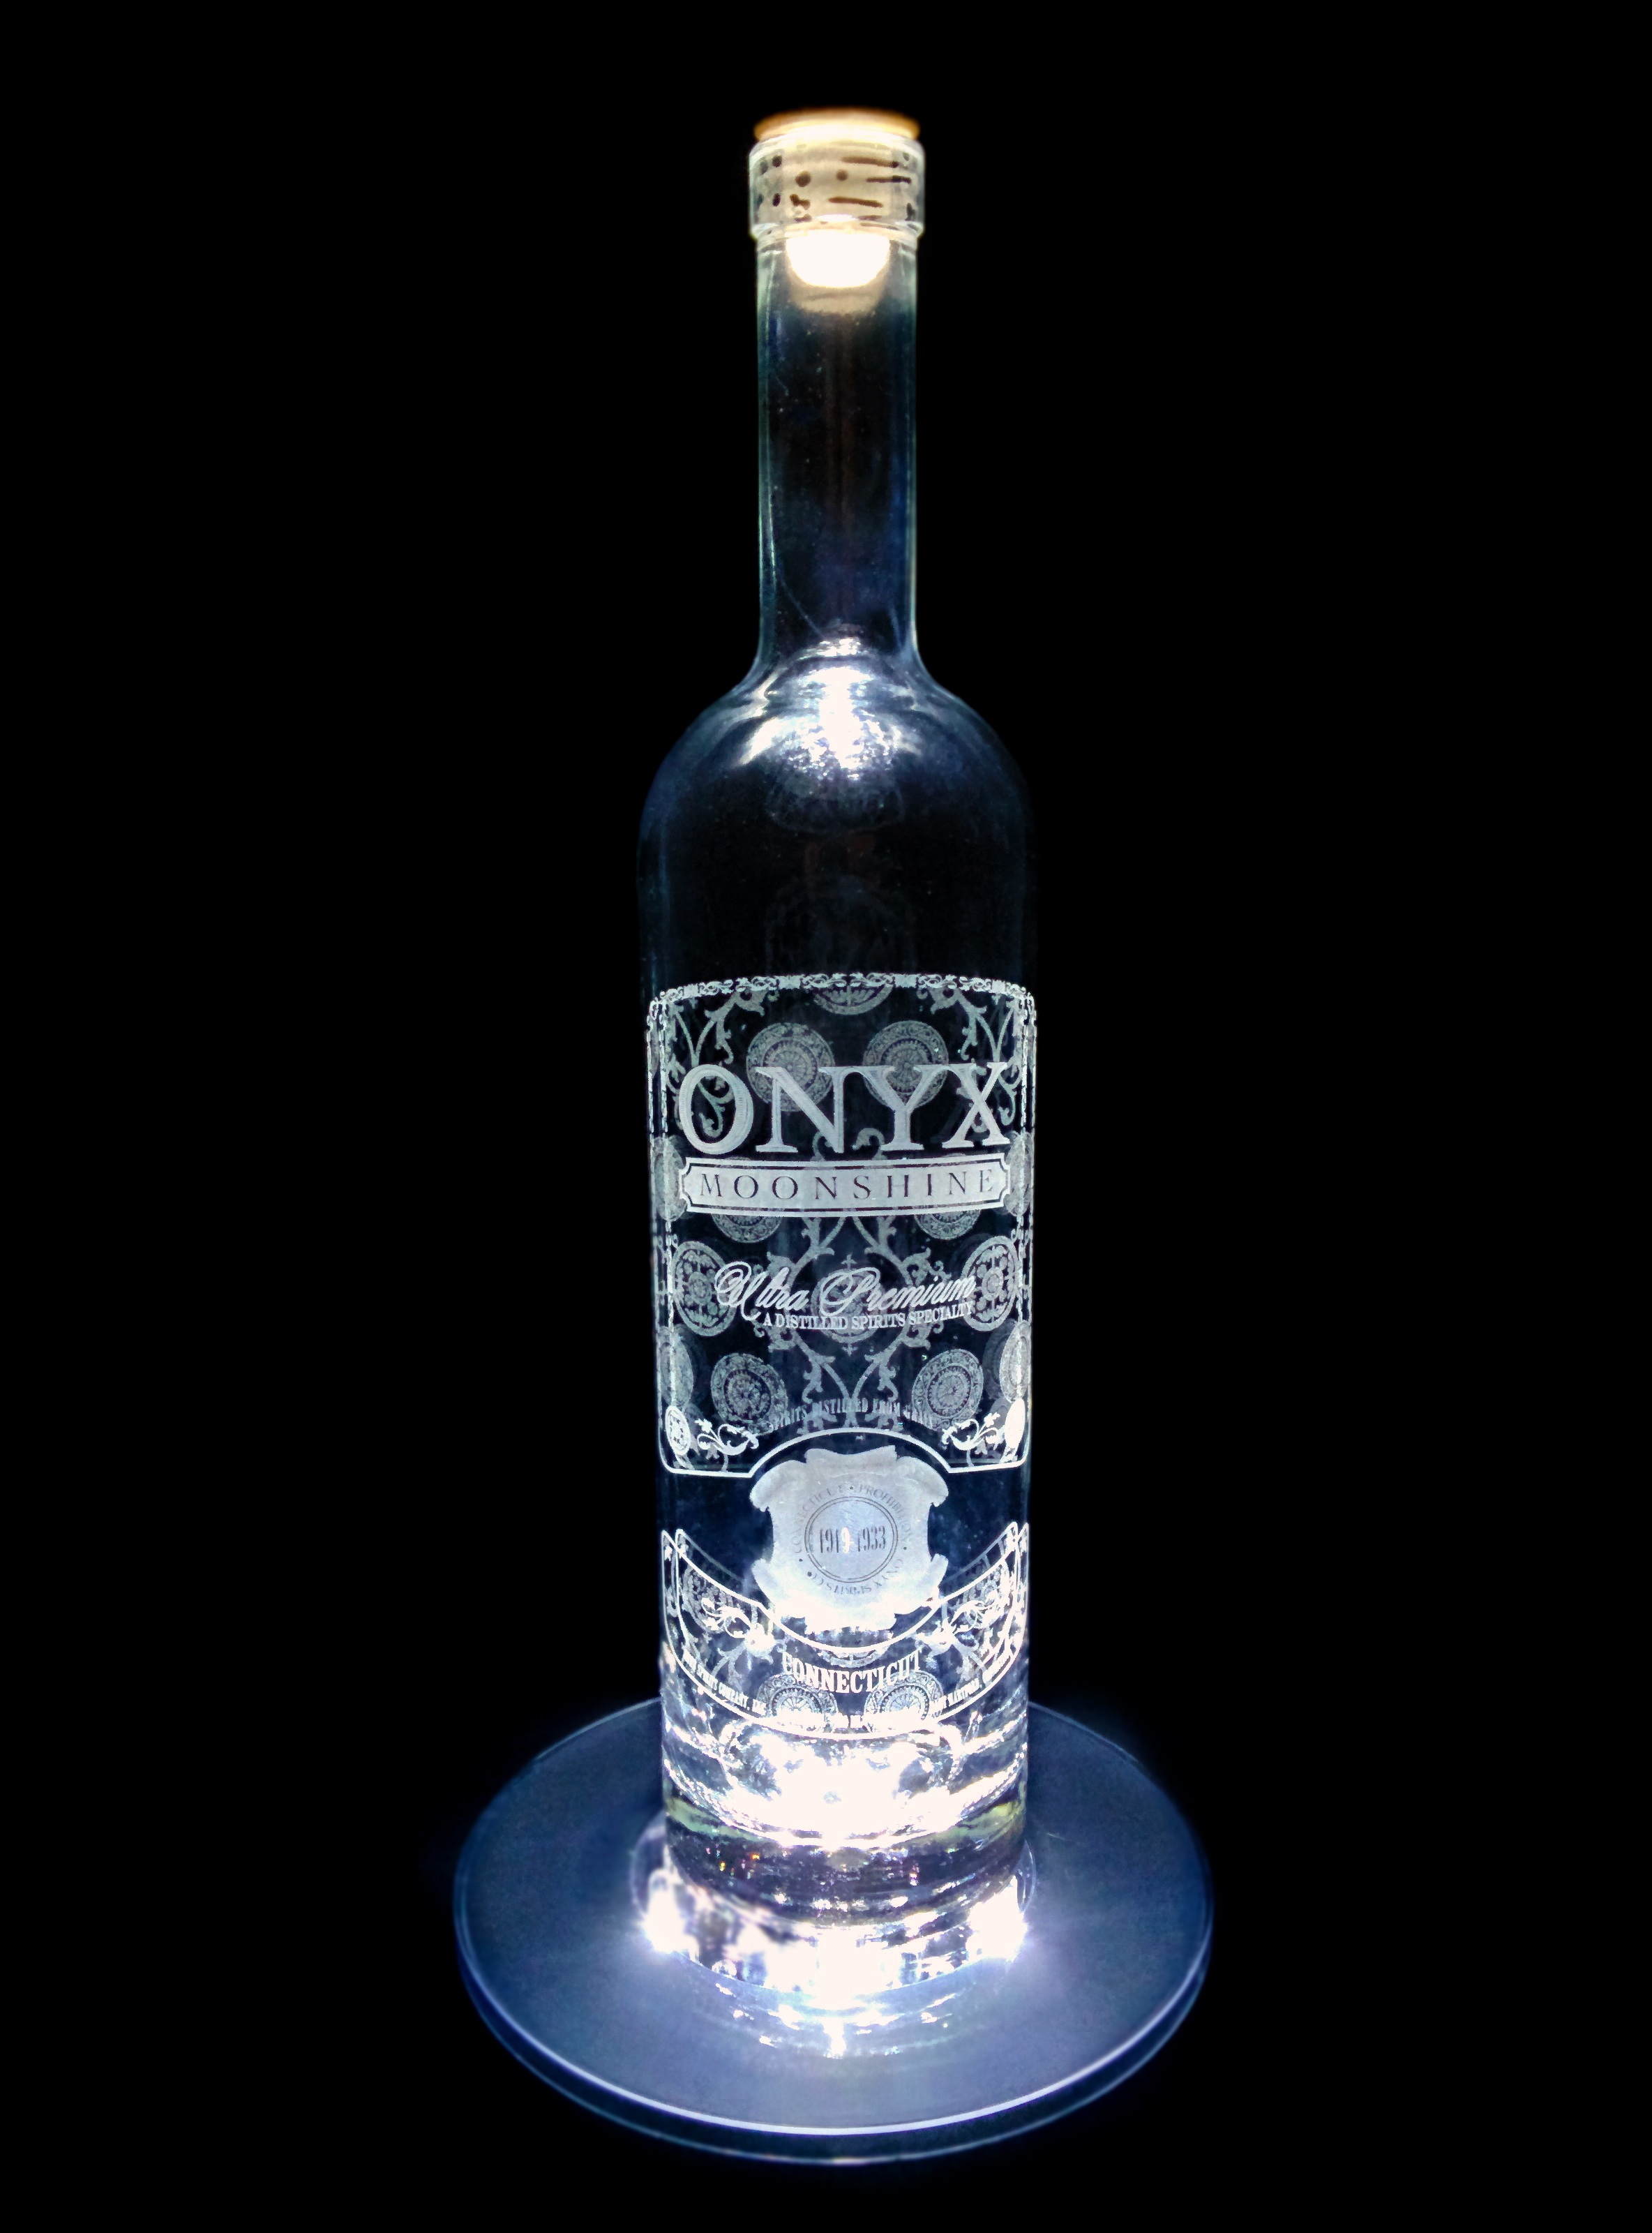 Special Label Laser Engraving on Glass for Onyx Spirits Company, LLC. of East Hartford Connecticut